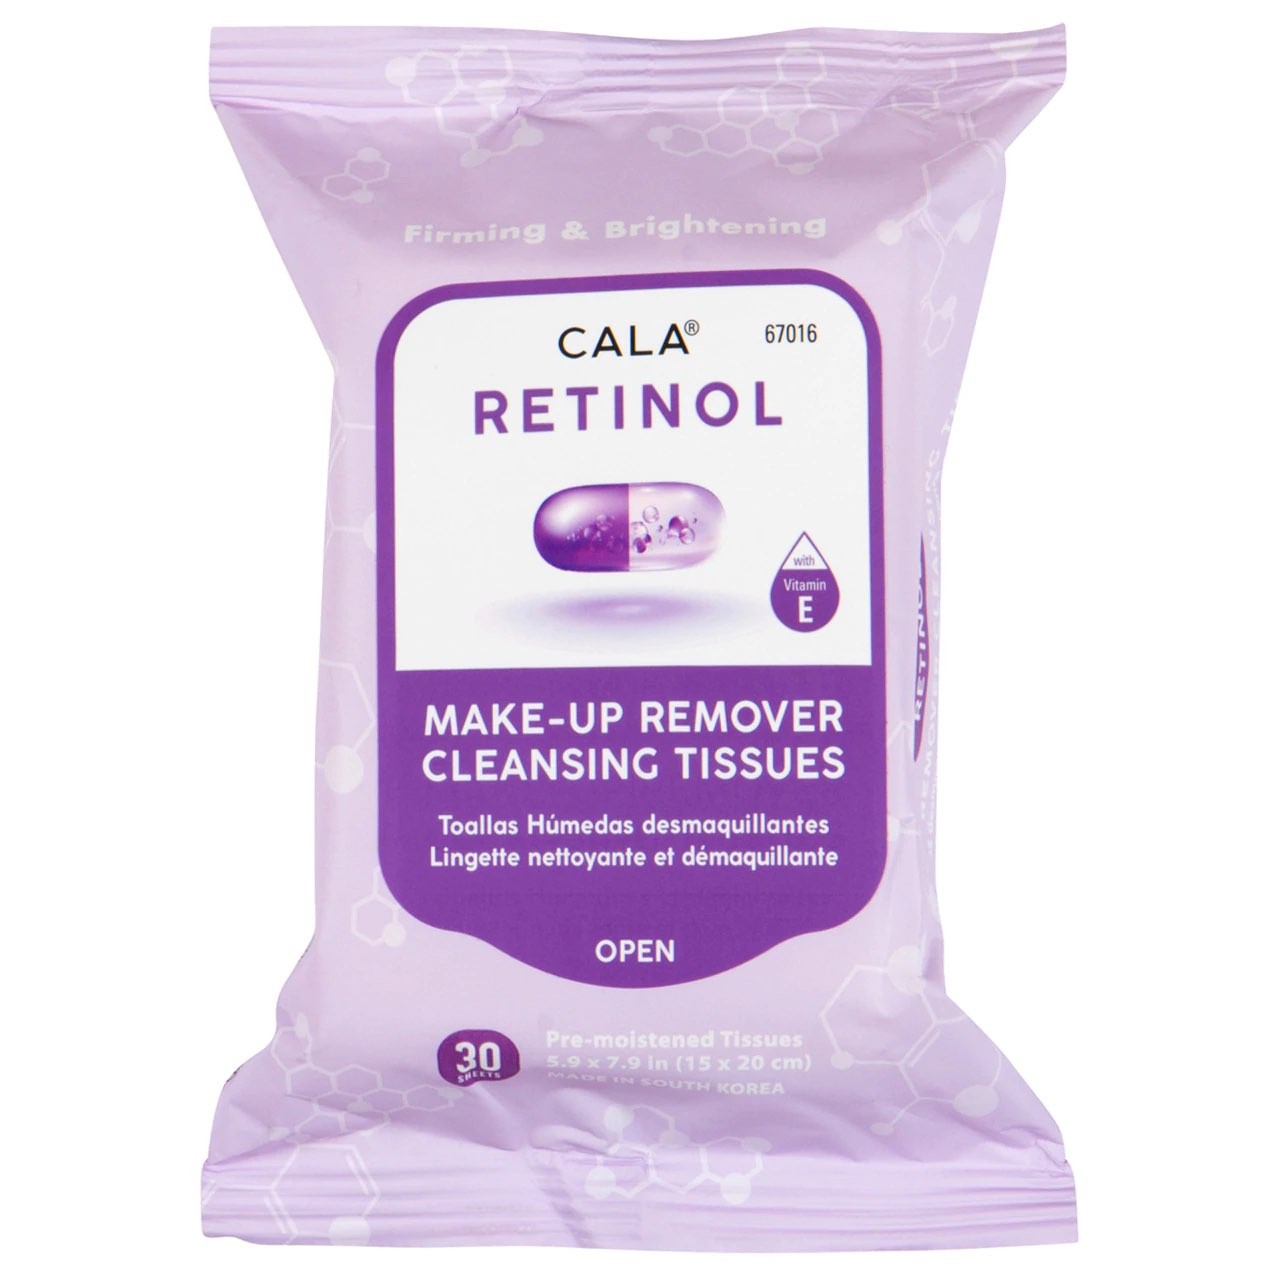 Make-Up Remover Cleansing Tissues - Retinol (30 Pieces)